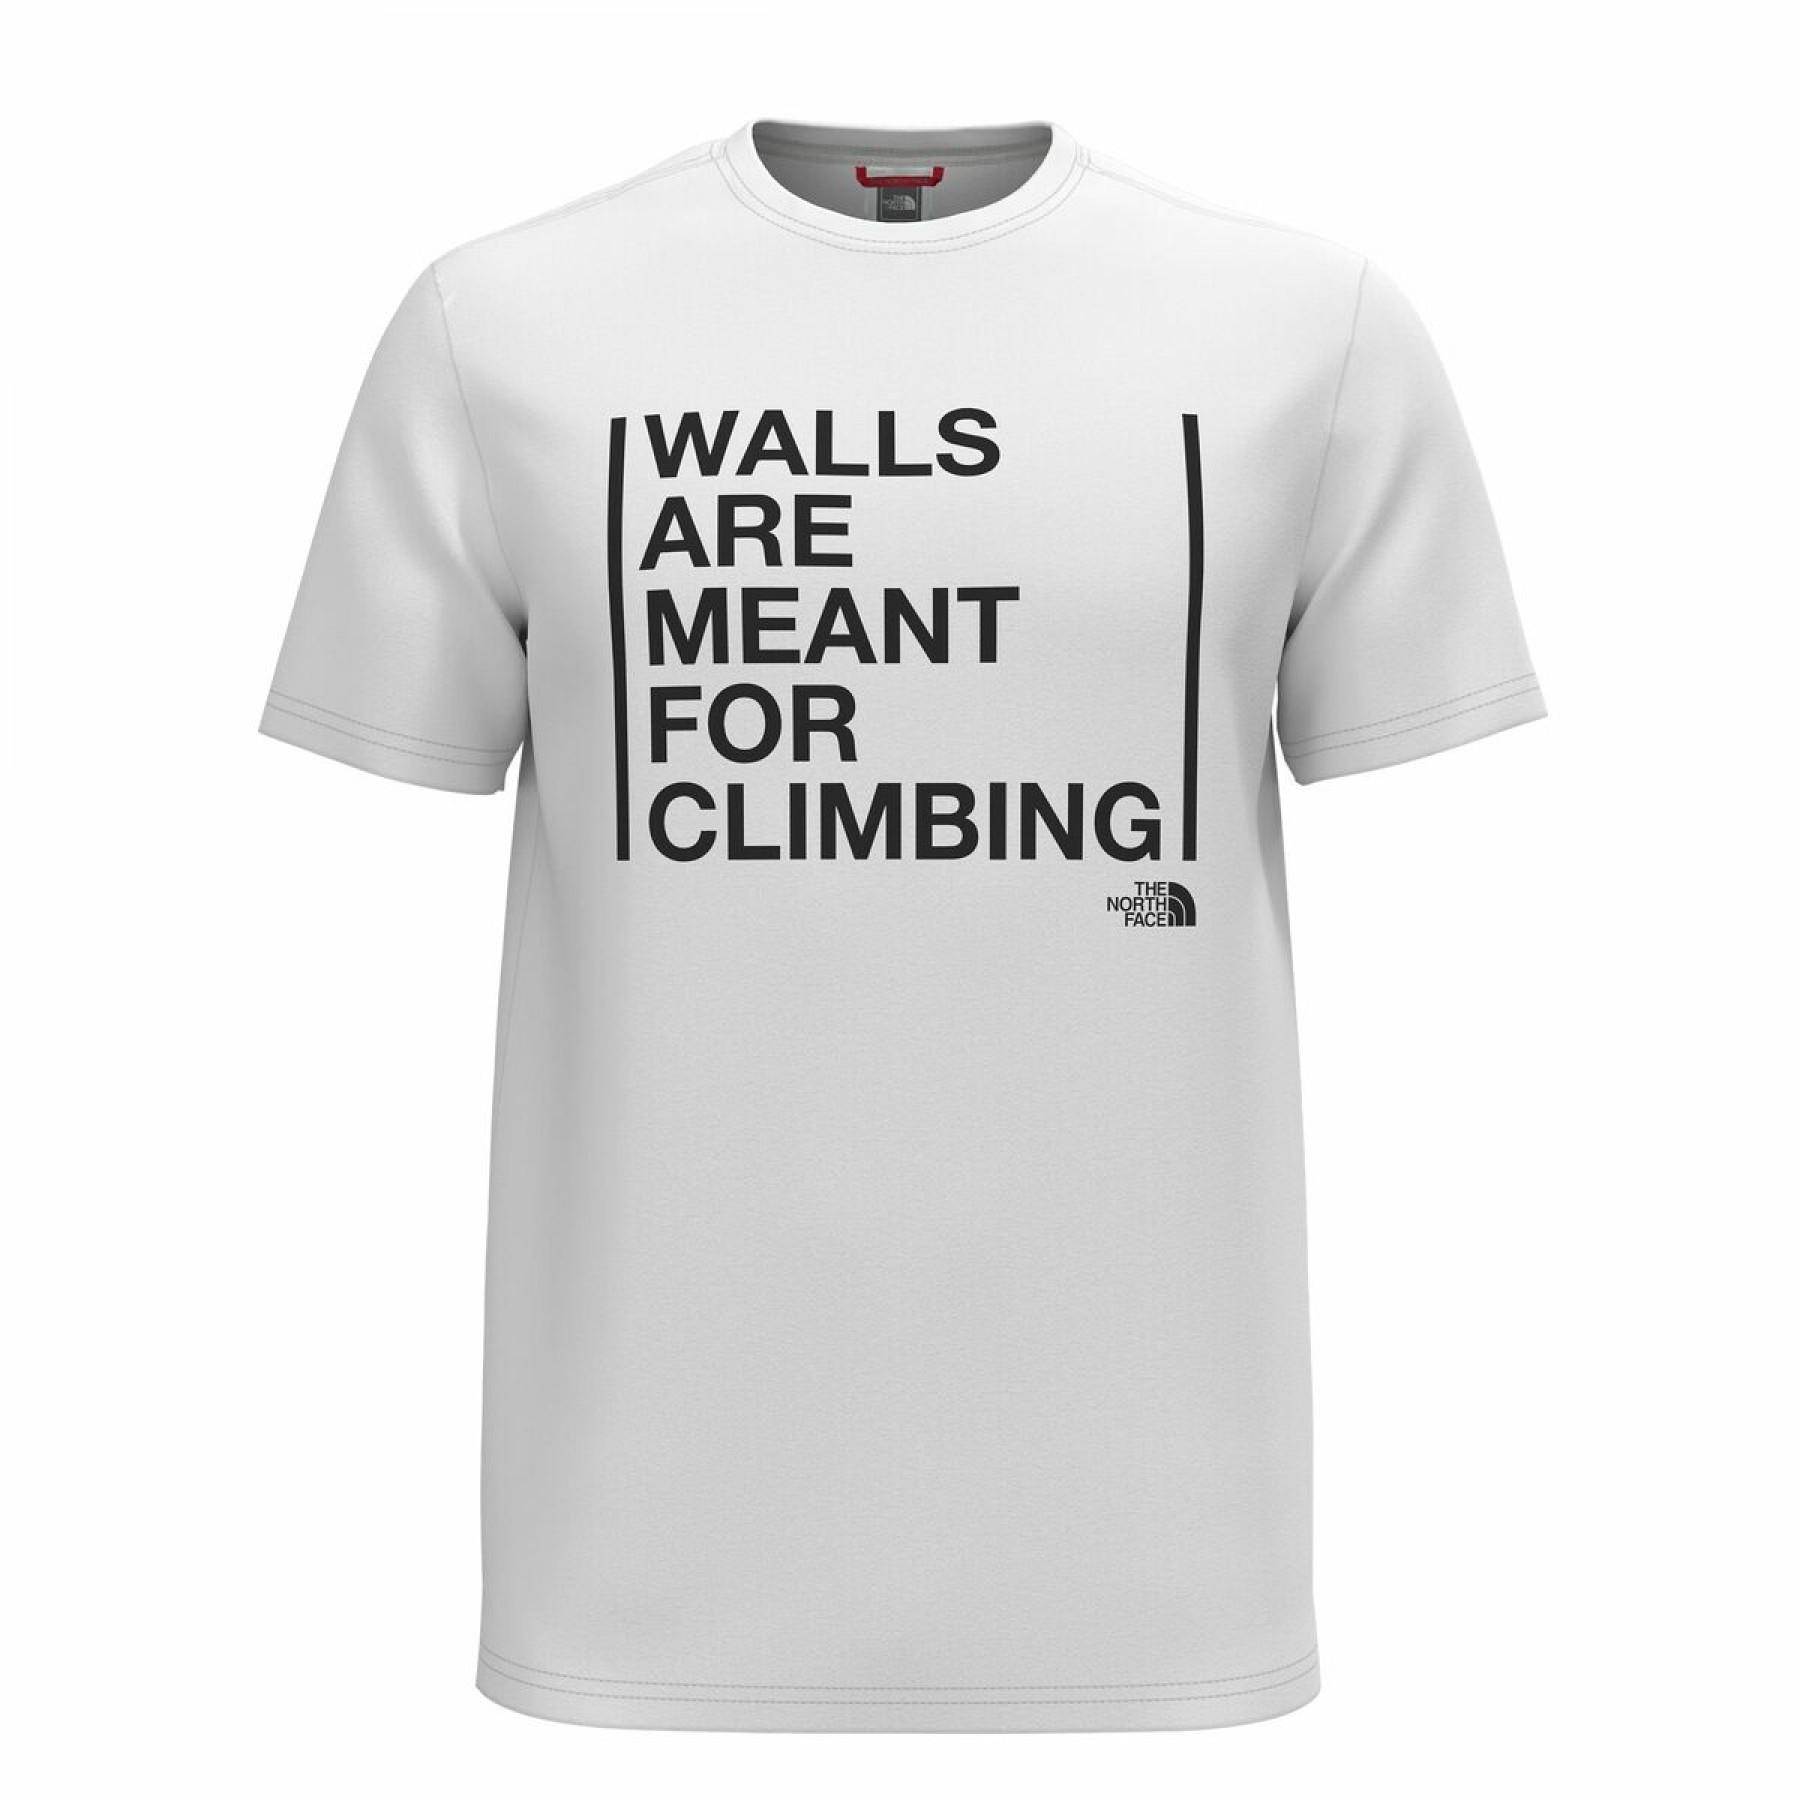 walls are meant for climbing t shirt